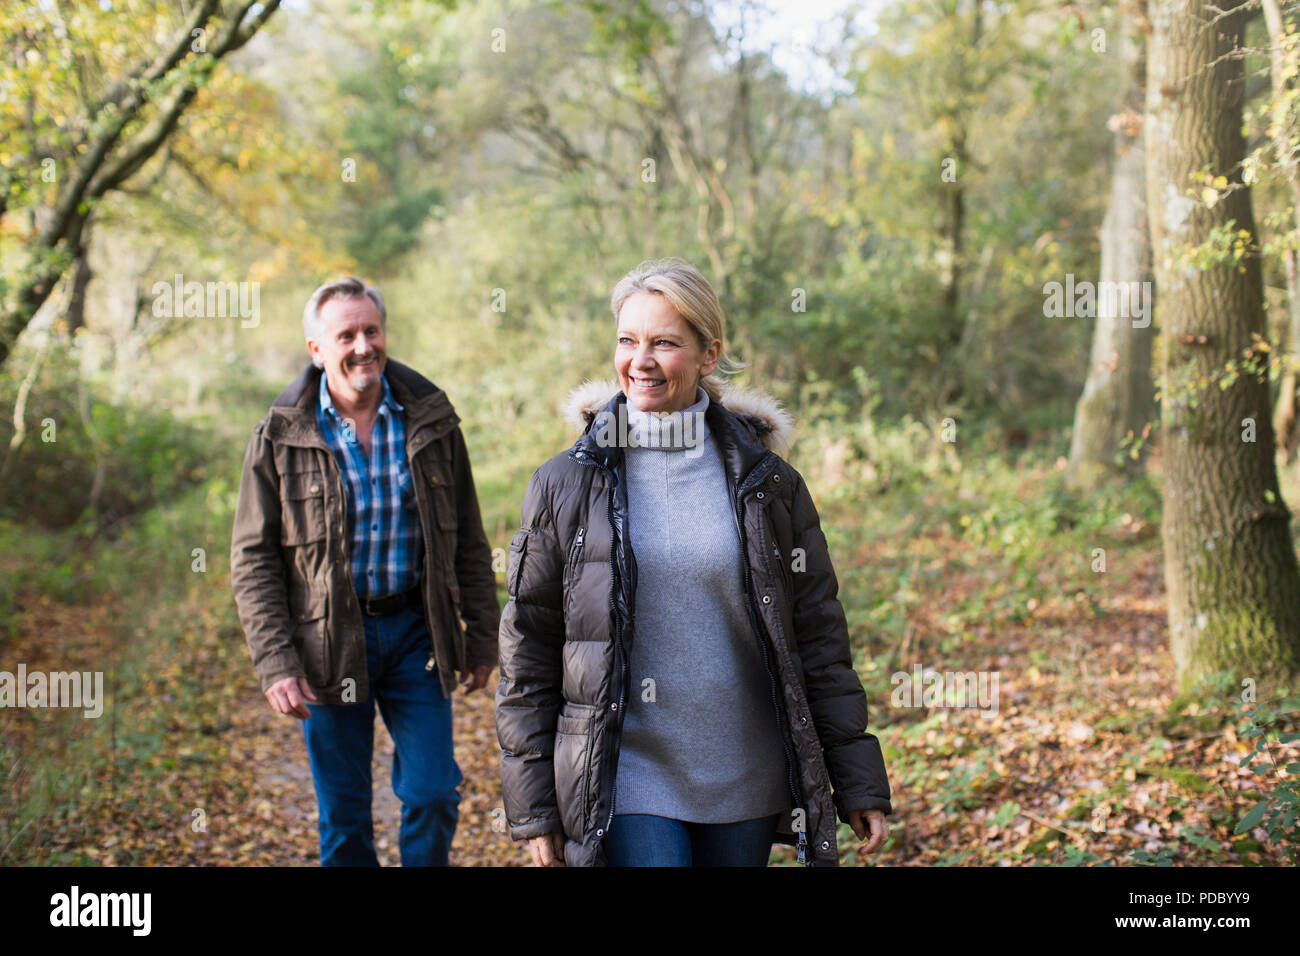 Smiling mature couple walking in sunny autumn woods Banque D'Images